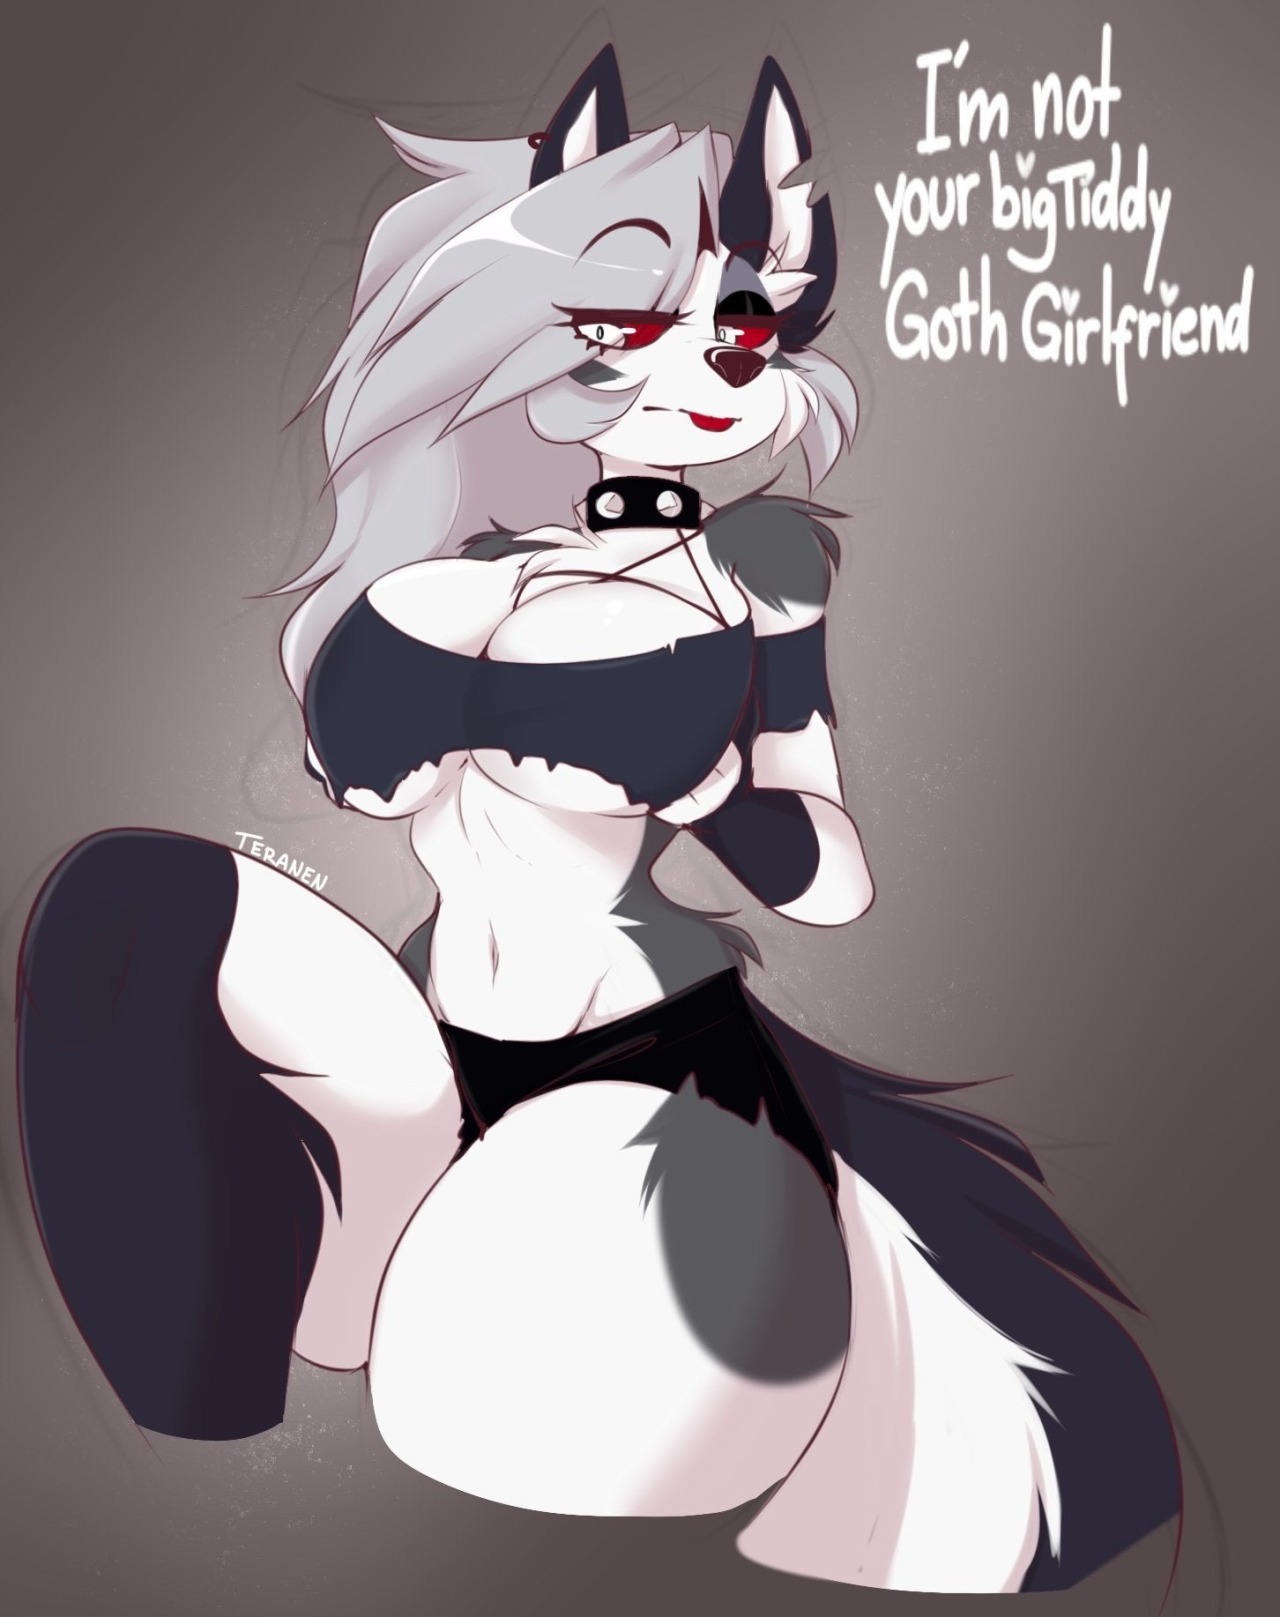 Yiff Hub Club â€” If possible could we get some goth milfs? :3